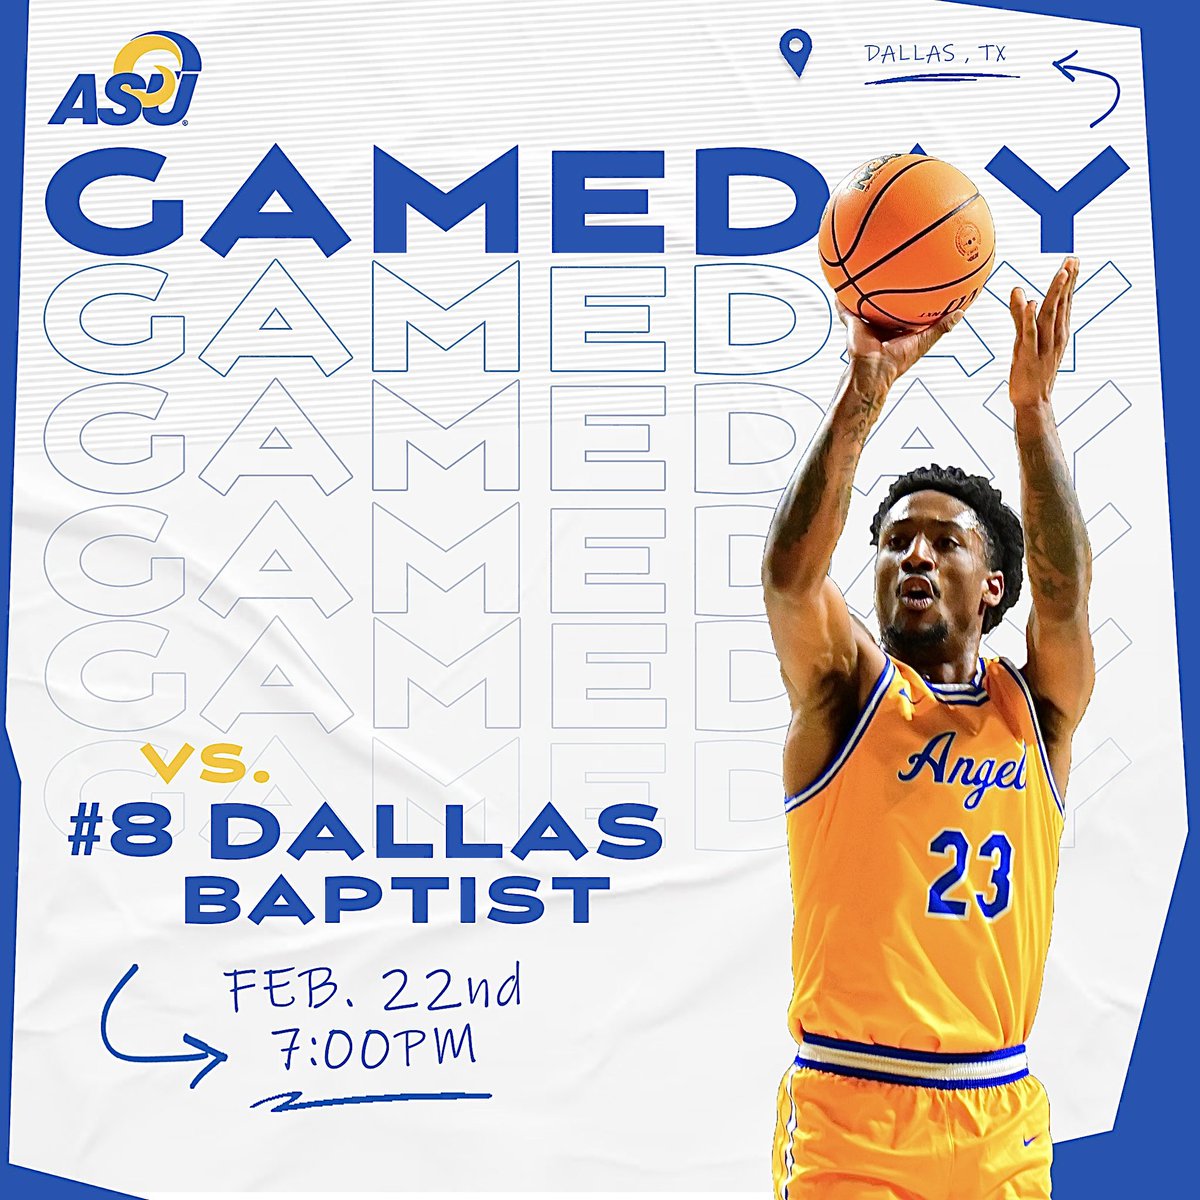 It’s 𝐆𝐀𝐌𝐄𝐃𝐀𝐘. Rams are on the road tonight against no. 8 Dallas Baptist at 7:00pm! #RamHoops | #RamFam